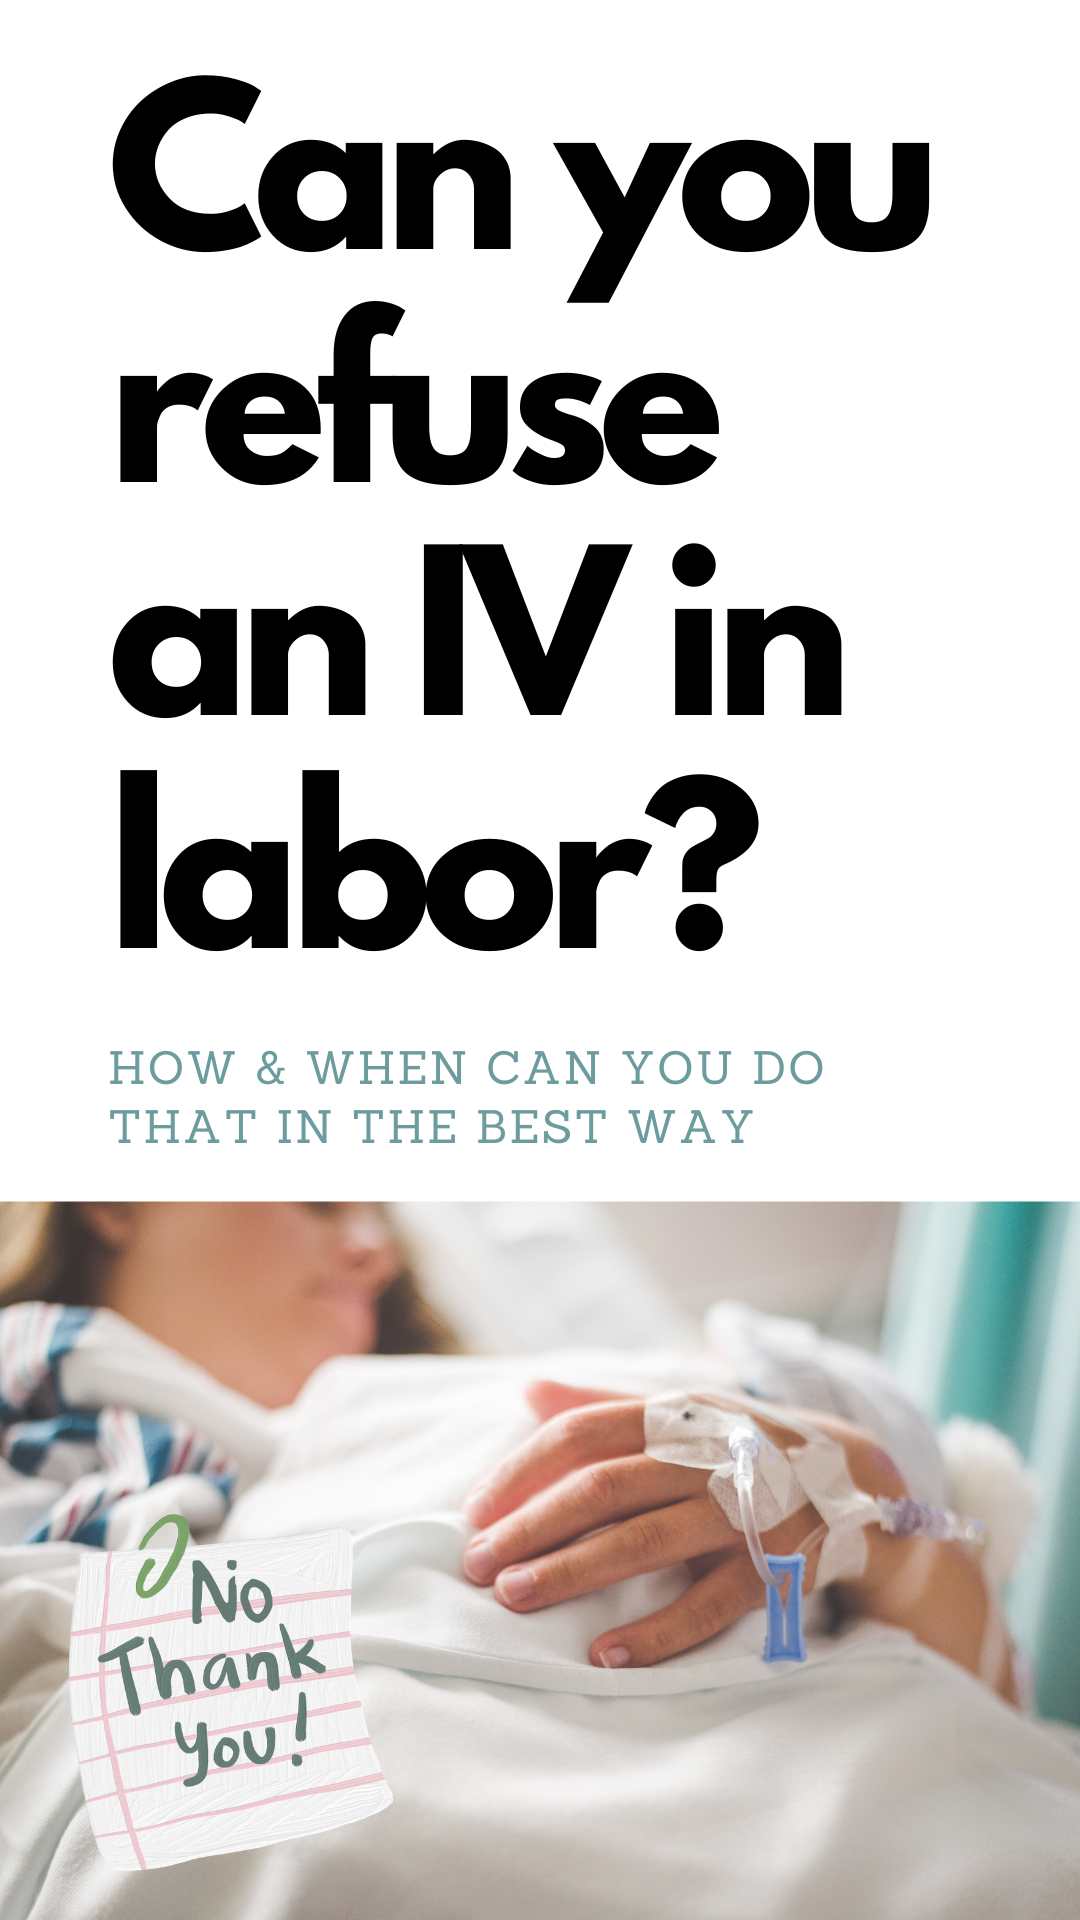 Delve into this informative guide on the IV during labor. Understand why it is recommended, when it becomes a necessity, what alternatives exist, and how to handle it should you decide against it. Plus, discover the unknown secret of the saline lock - a refreshing alternative for those who dislike the feeling of being hooked up to an IV.